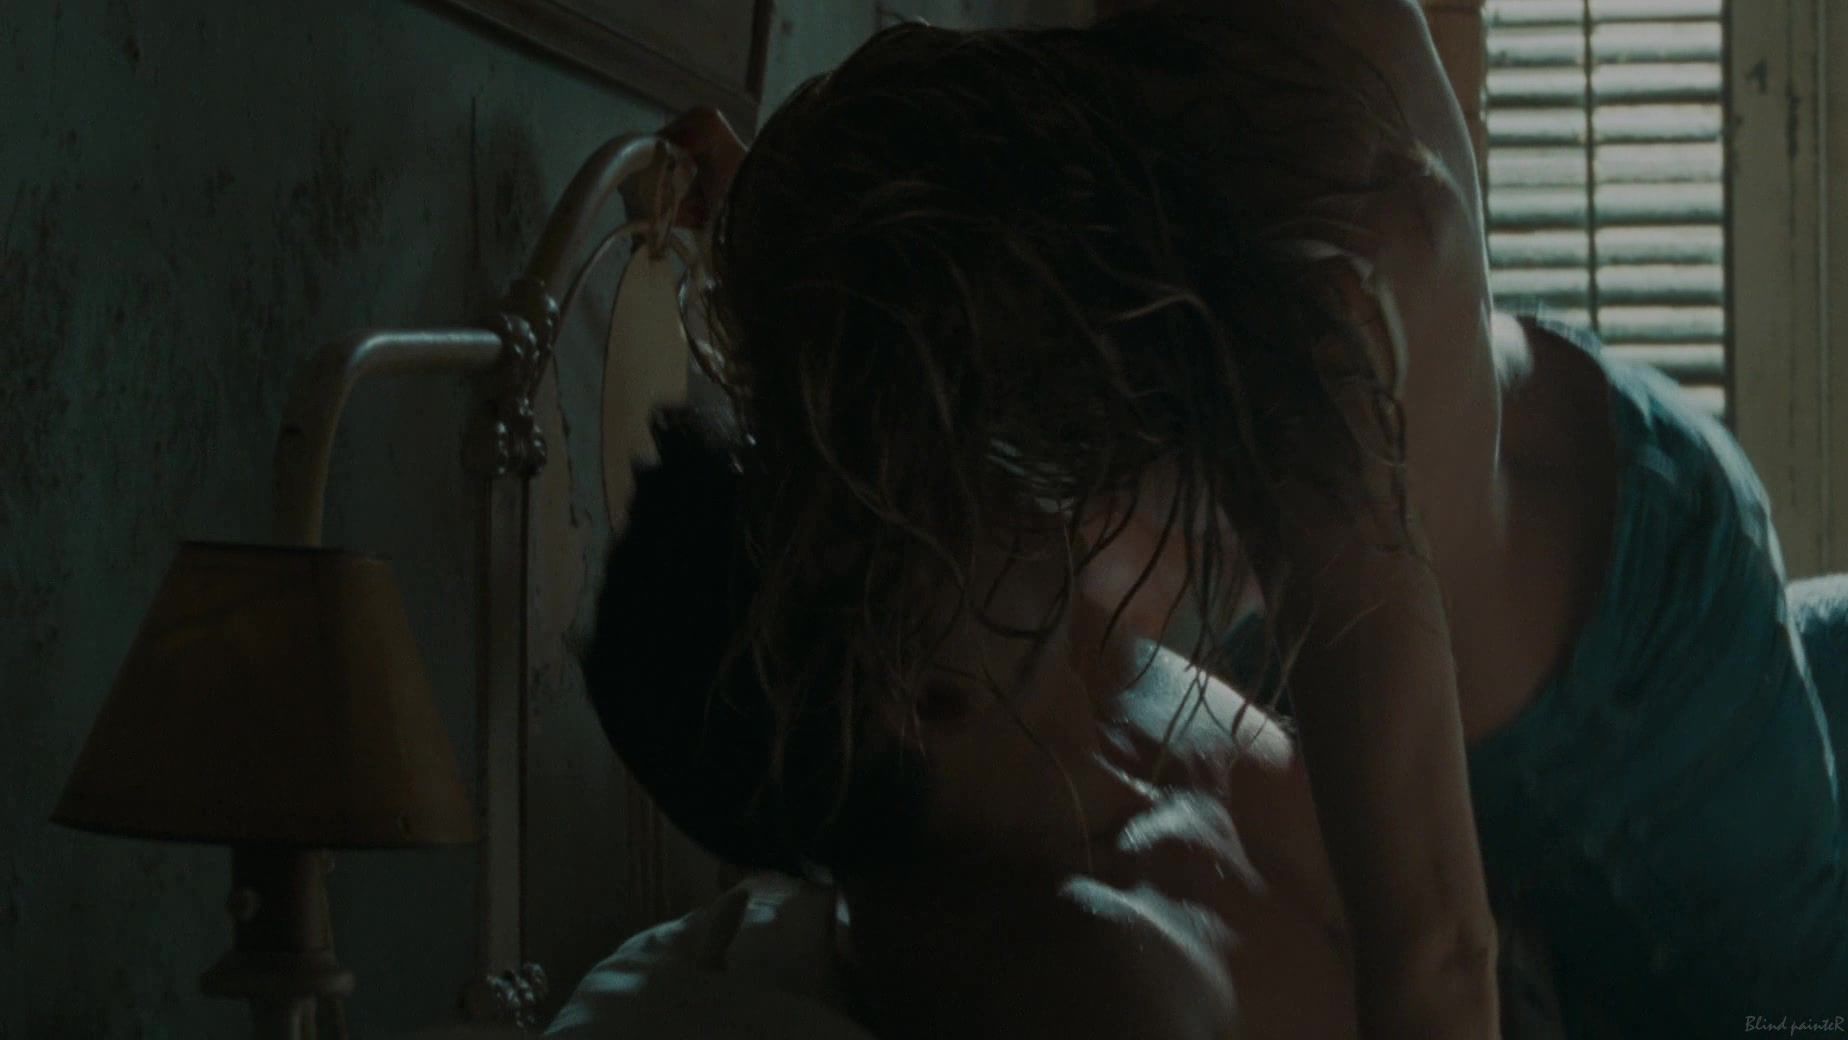 Lesbian Sex Amber Heard nude - The Rum Diary (2011) White Chick